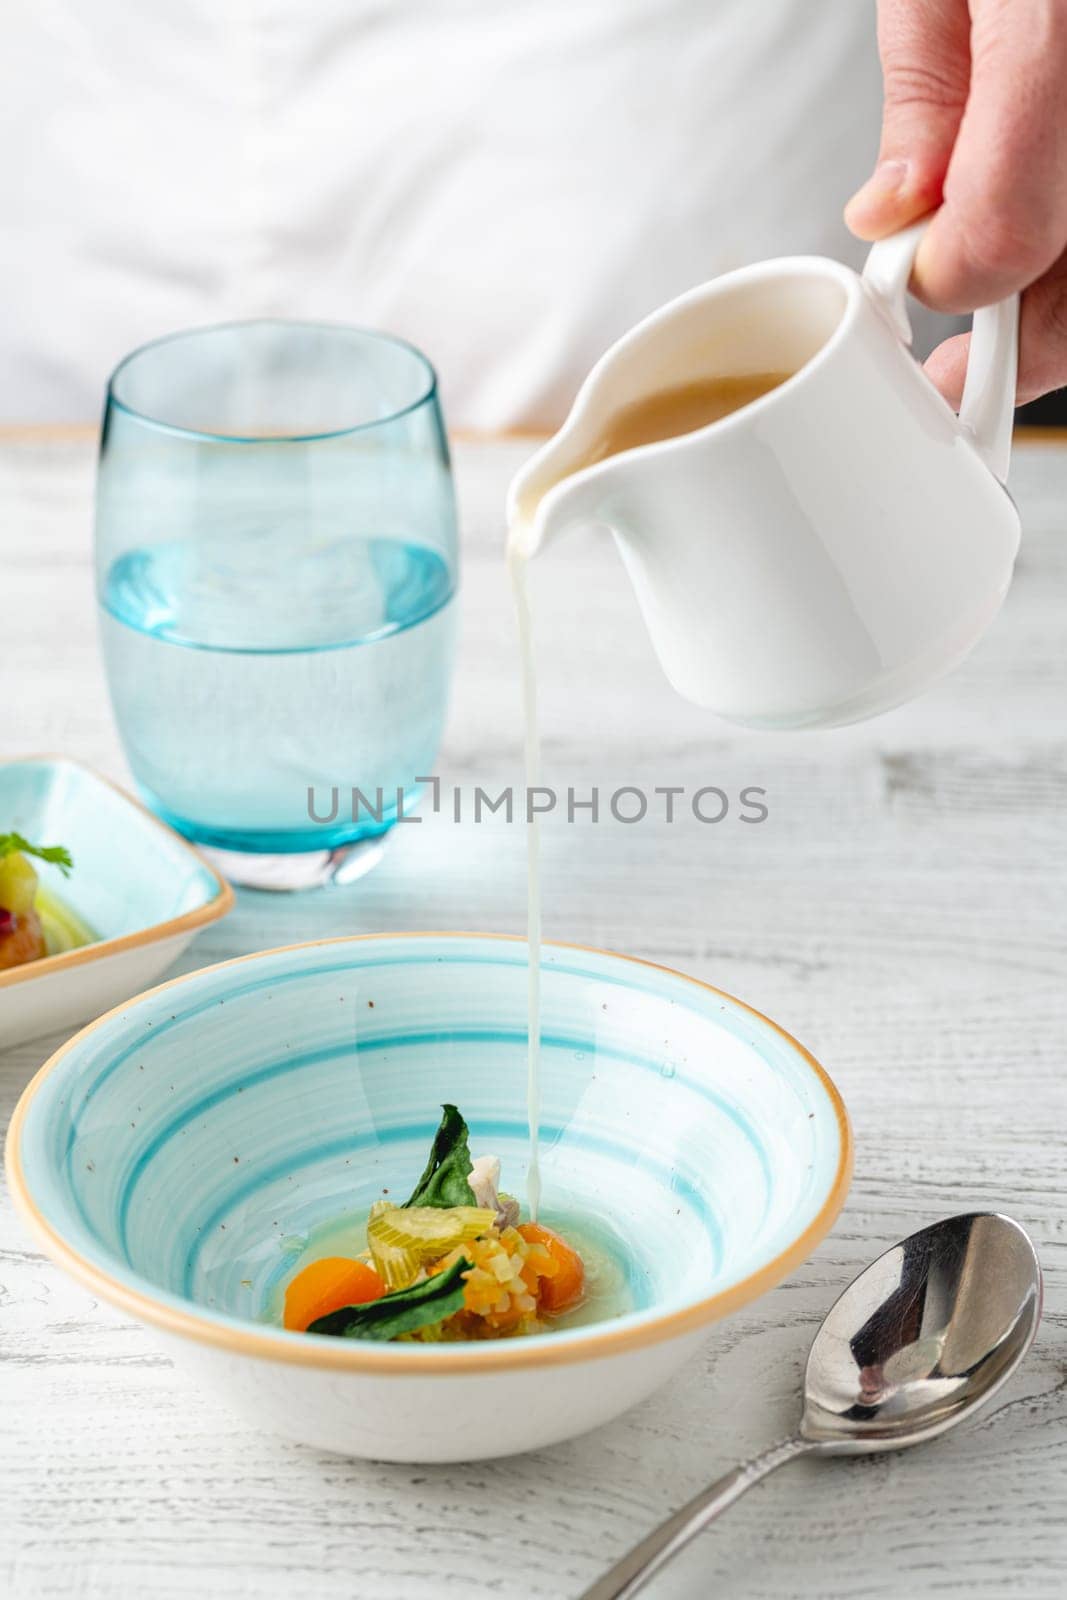 Fish soup with vegetables on white wooden table